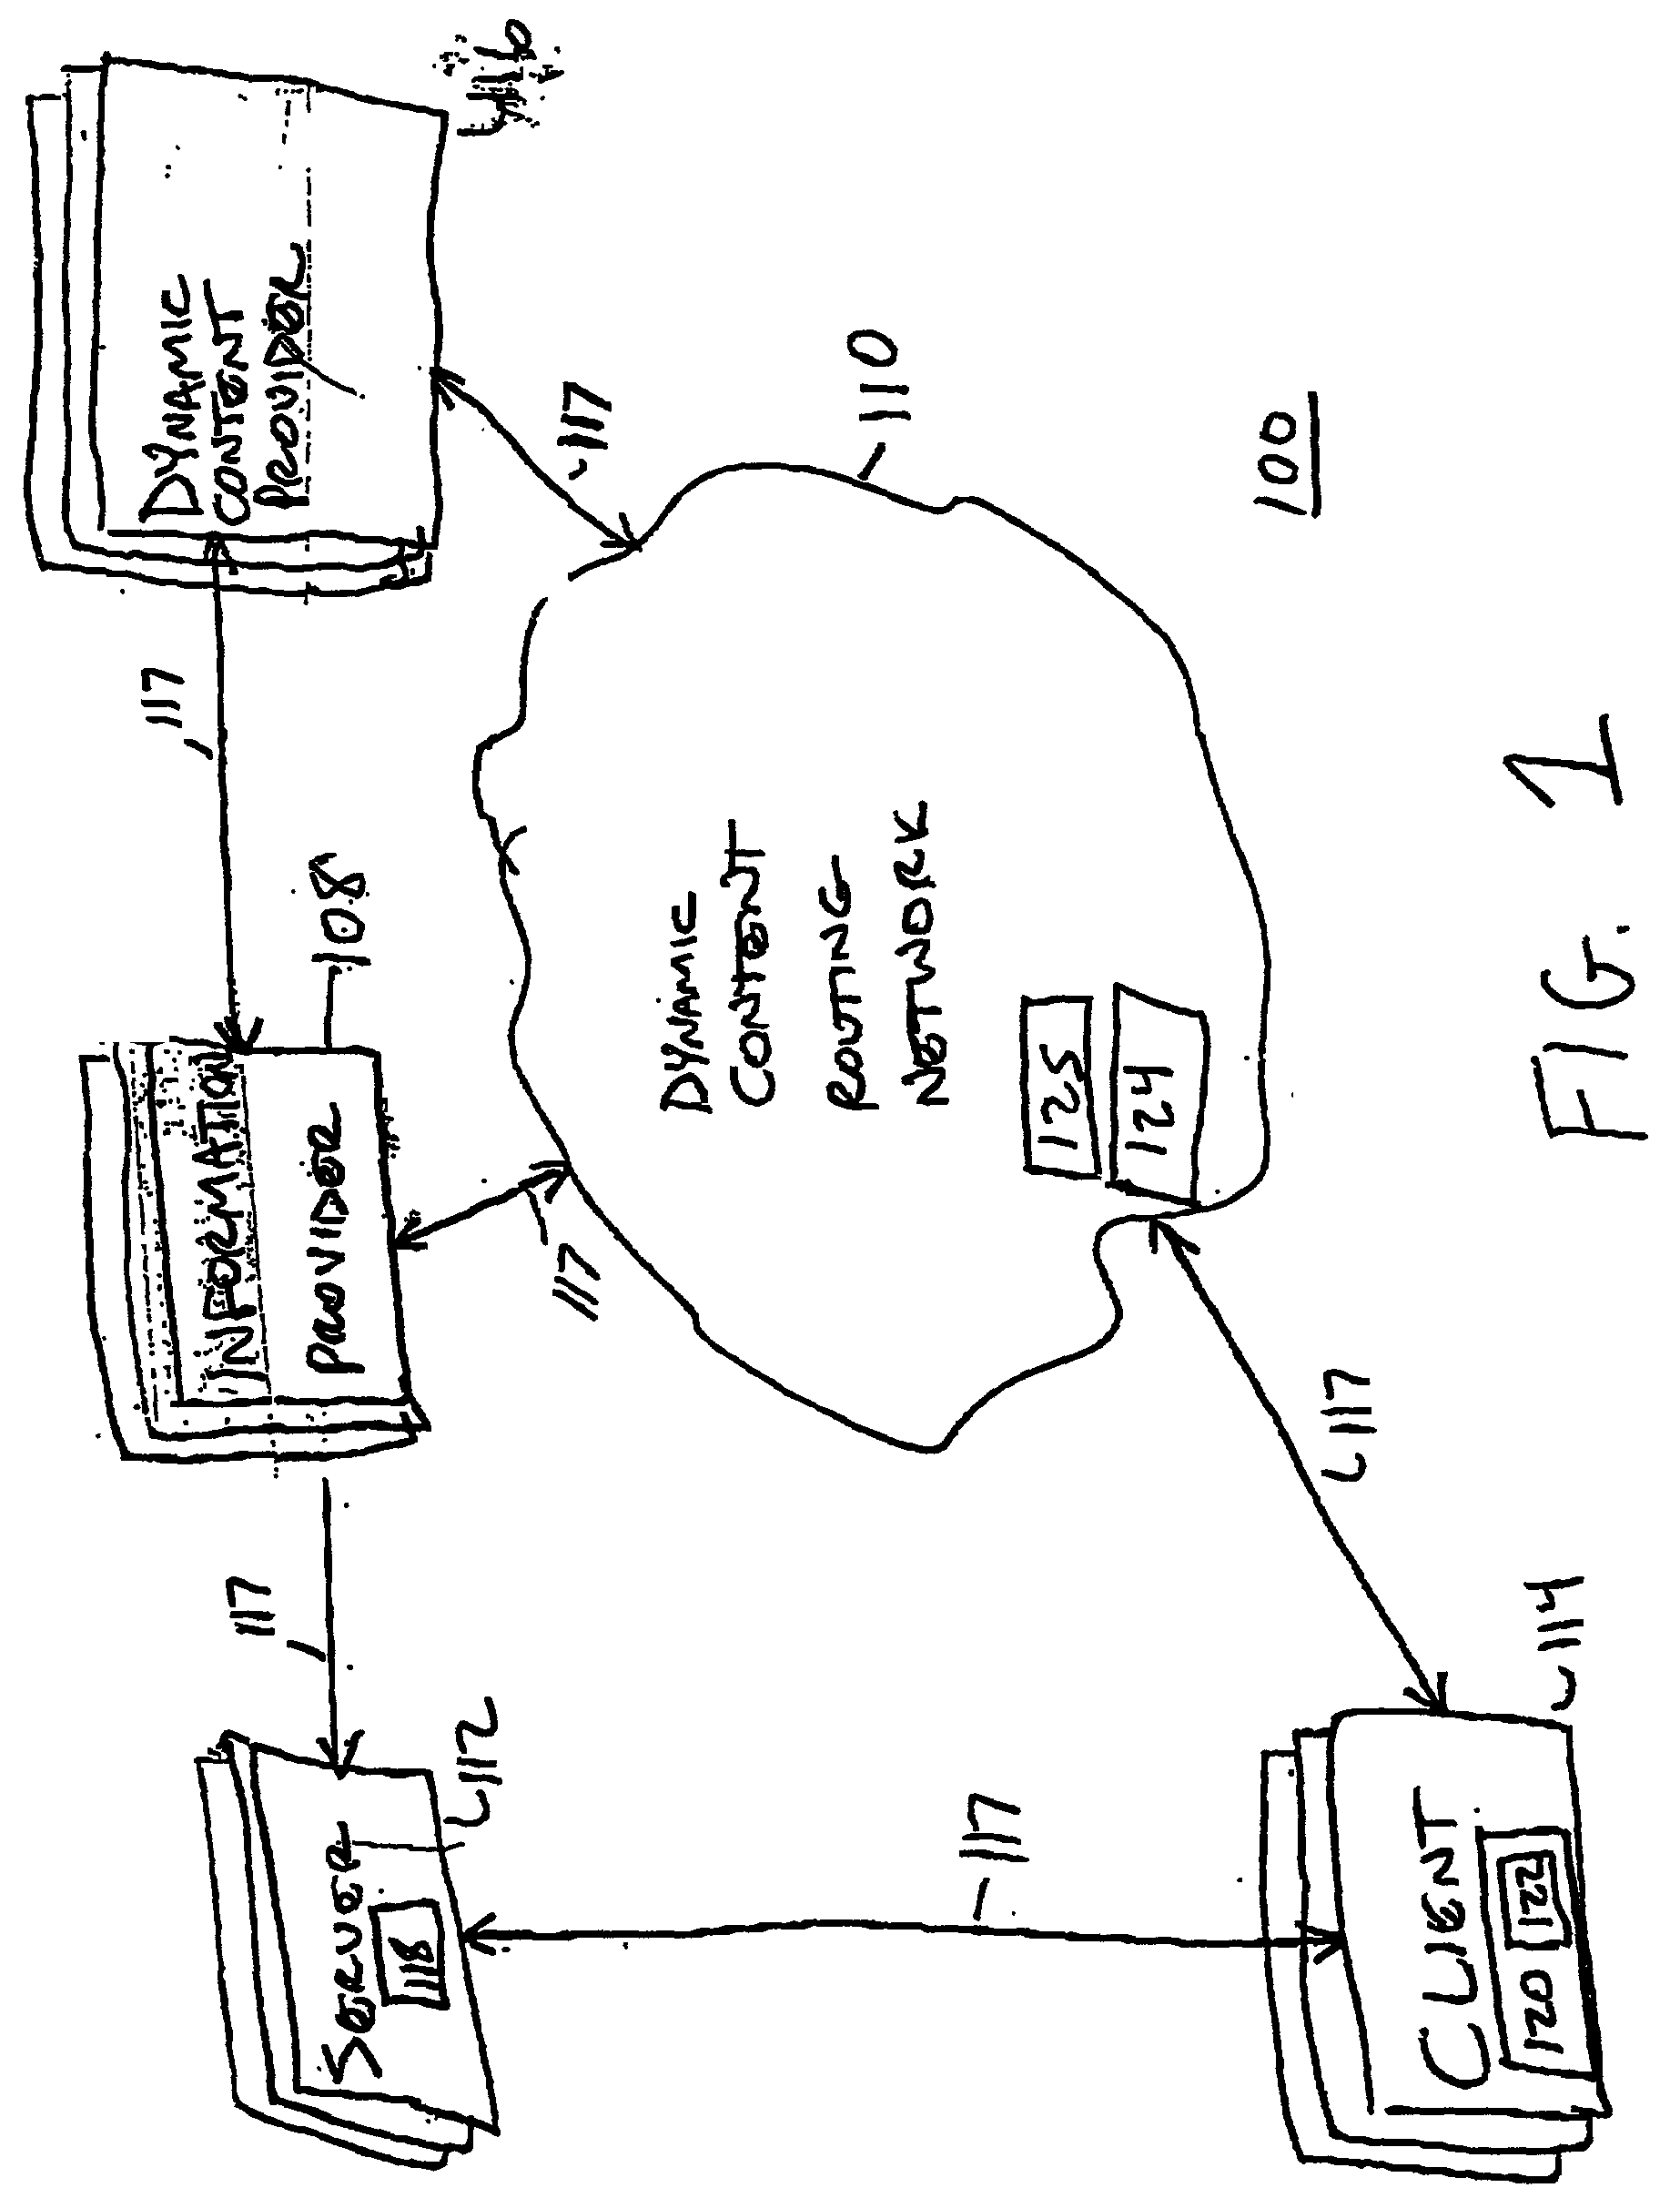 Asynchronous messaging using a node specialization architecture in the dynamic routing network